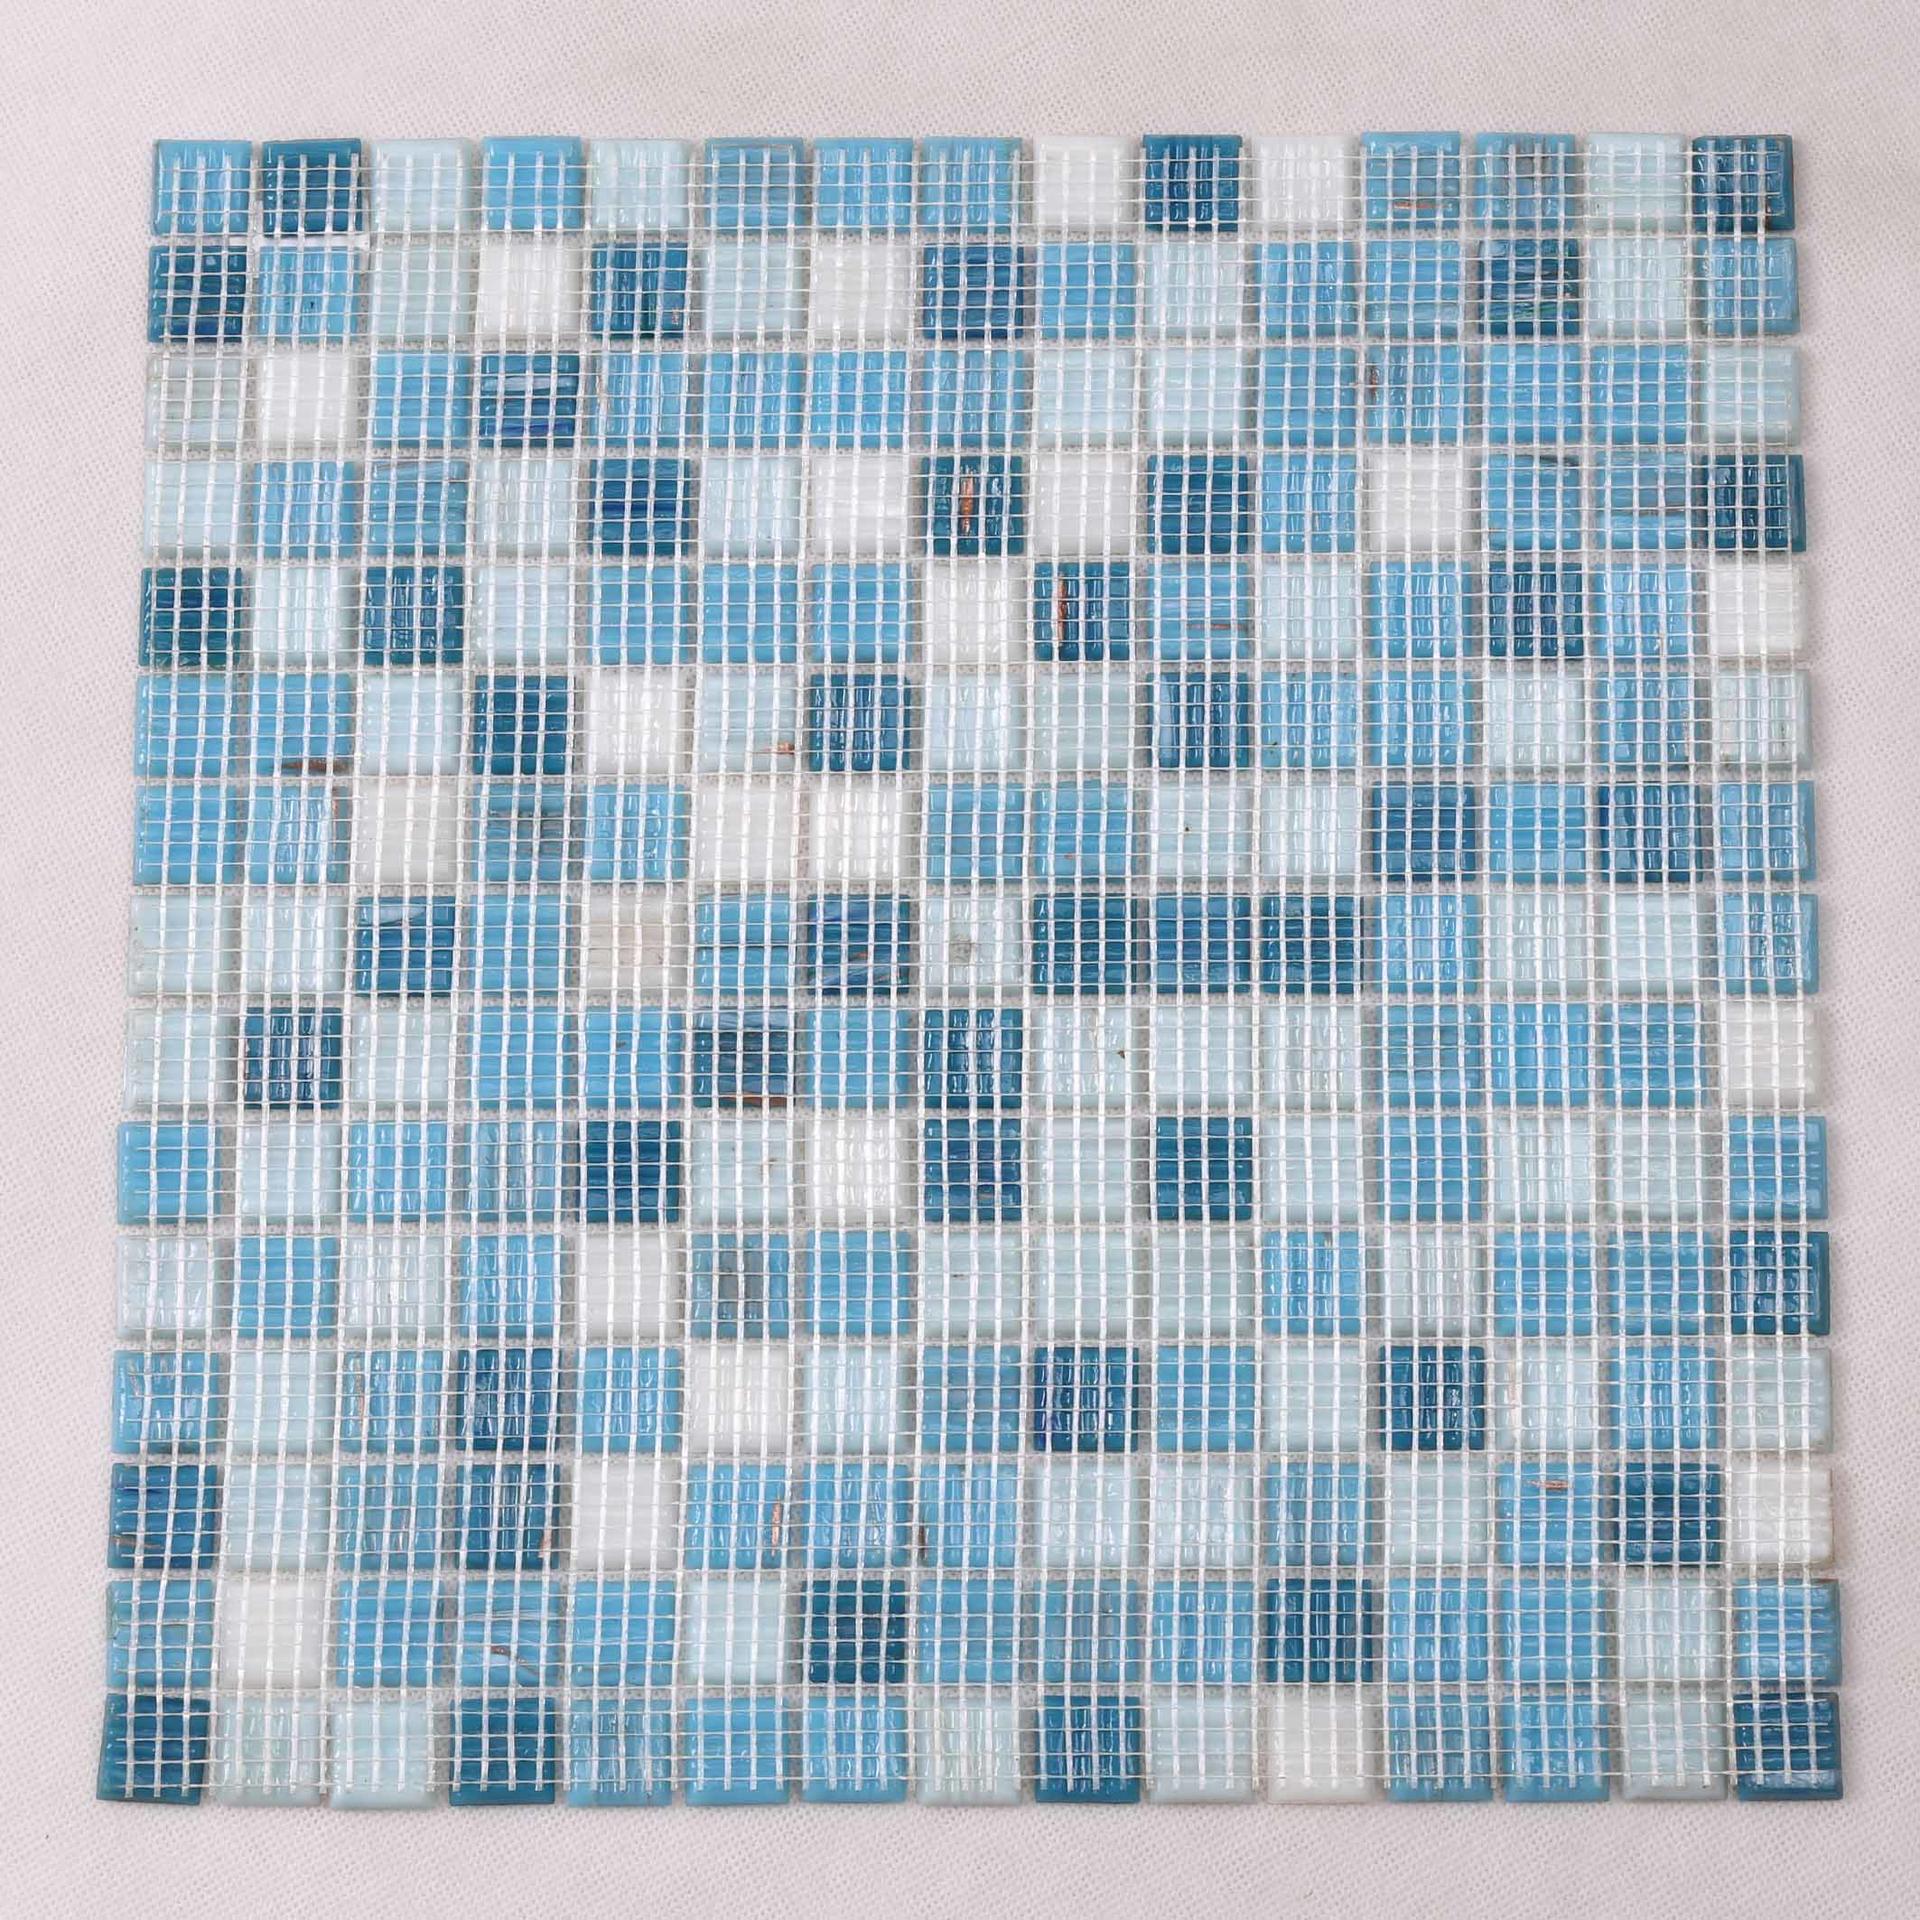 surround pool mosaics waterline wholesale for spa